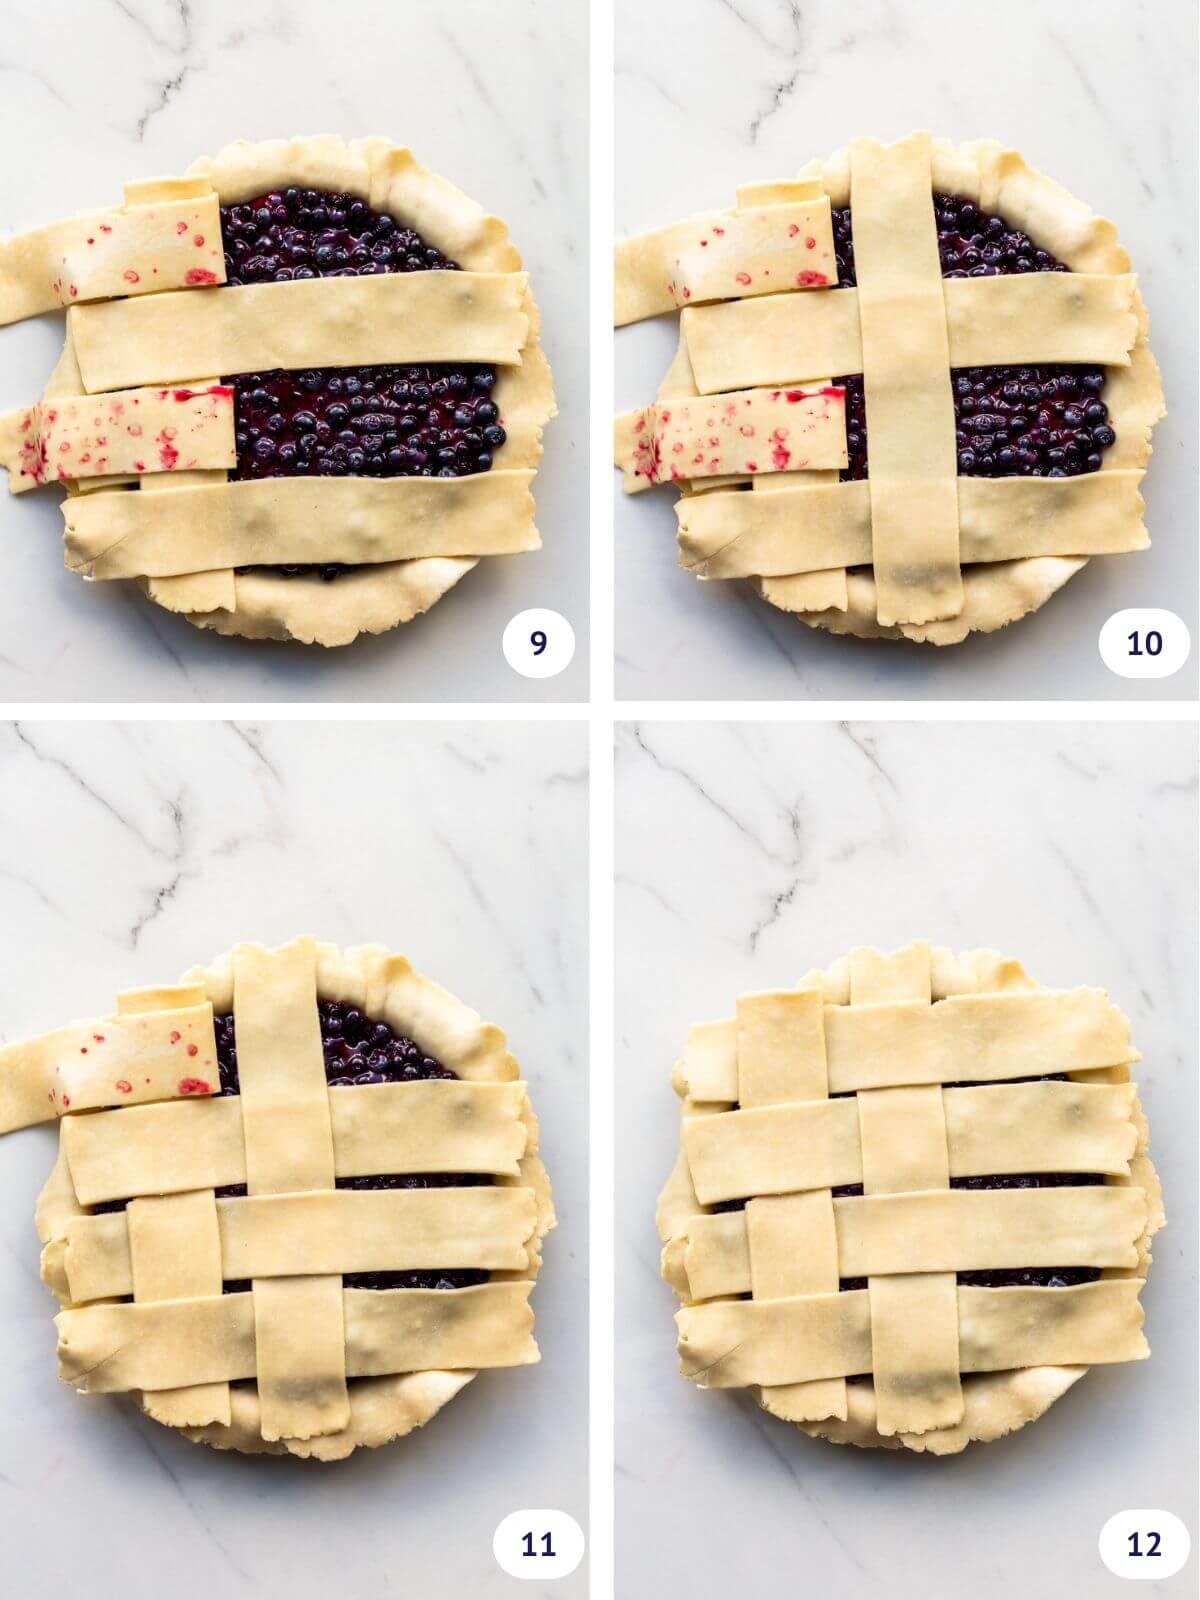 Collage to show weaving in second vertical strip of a fat lattice with 7 strips of pie dough.